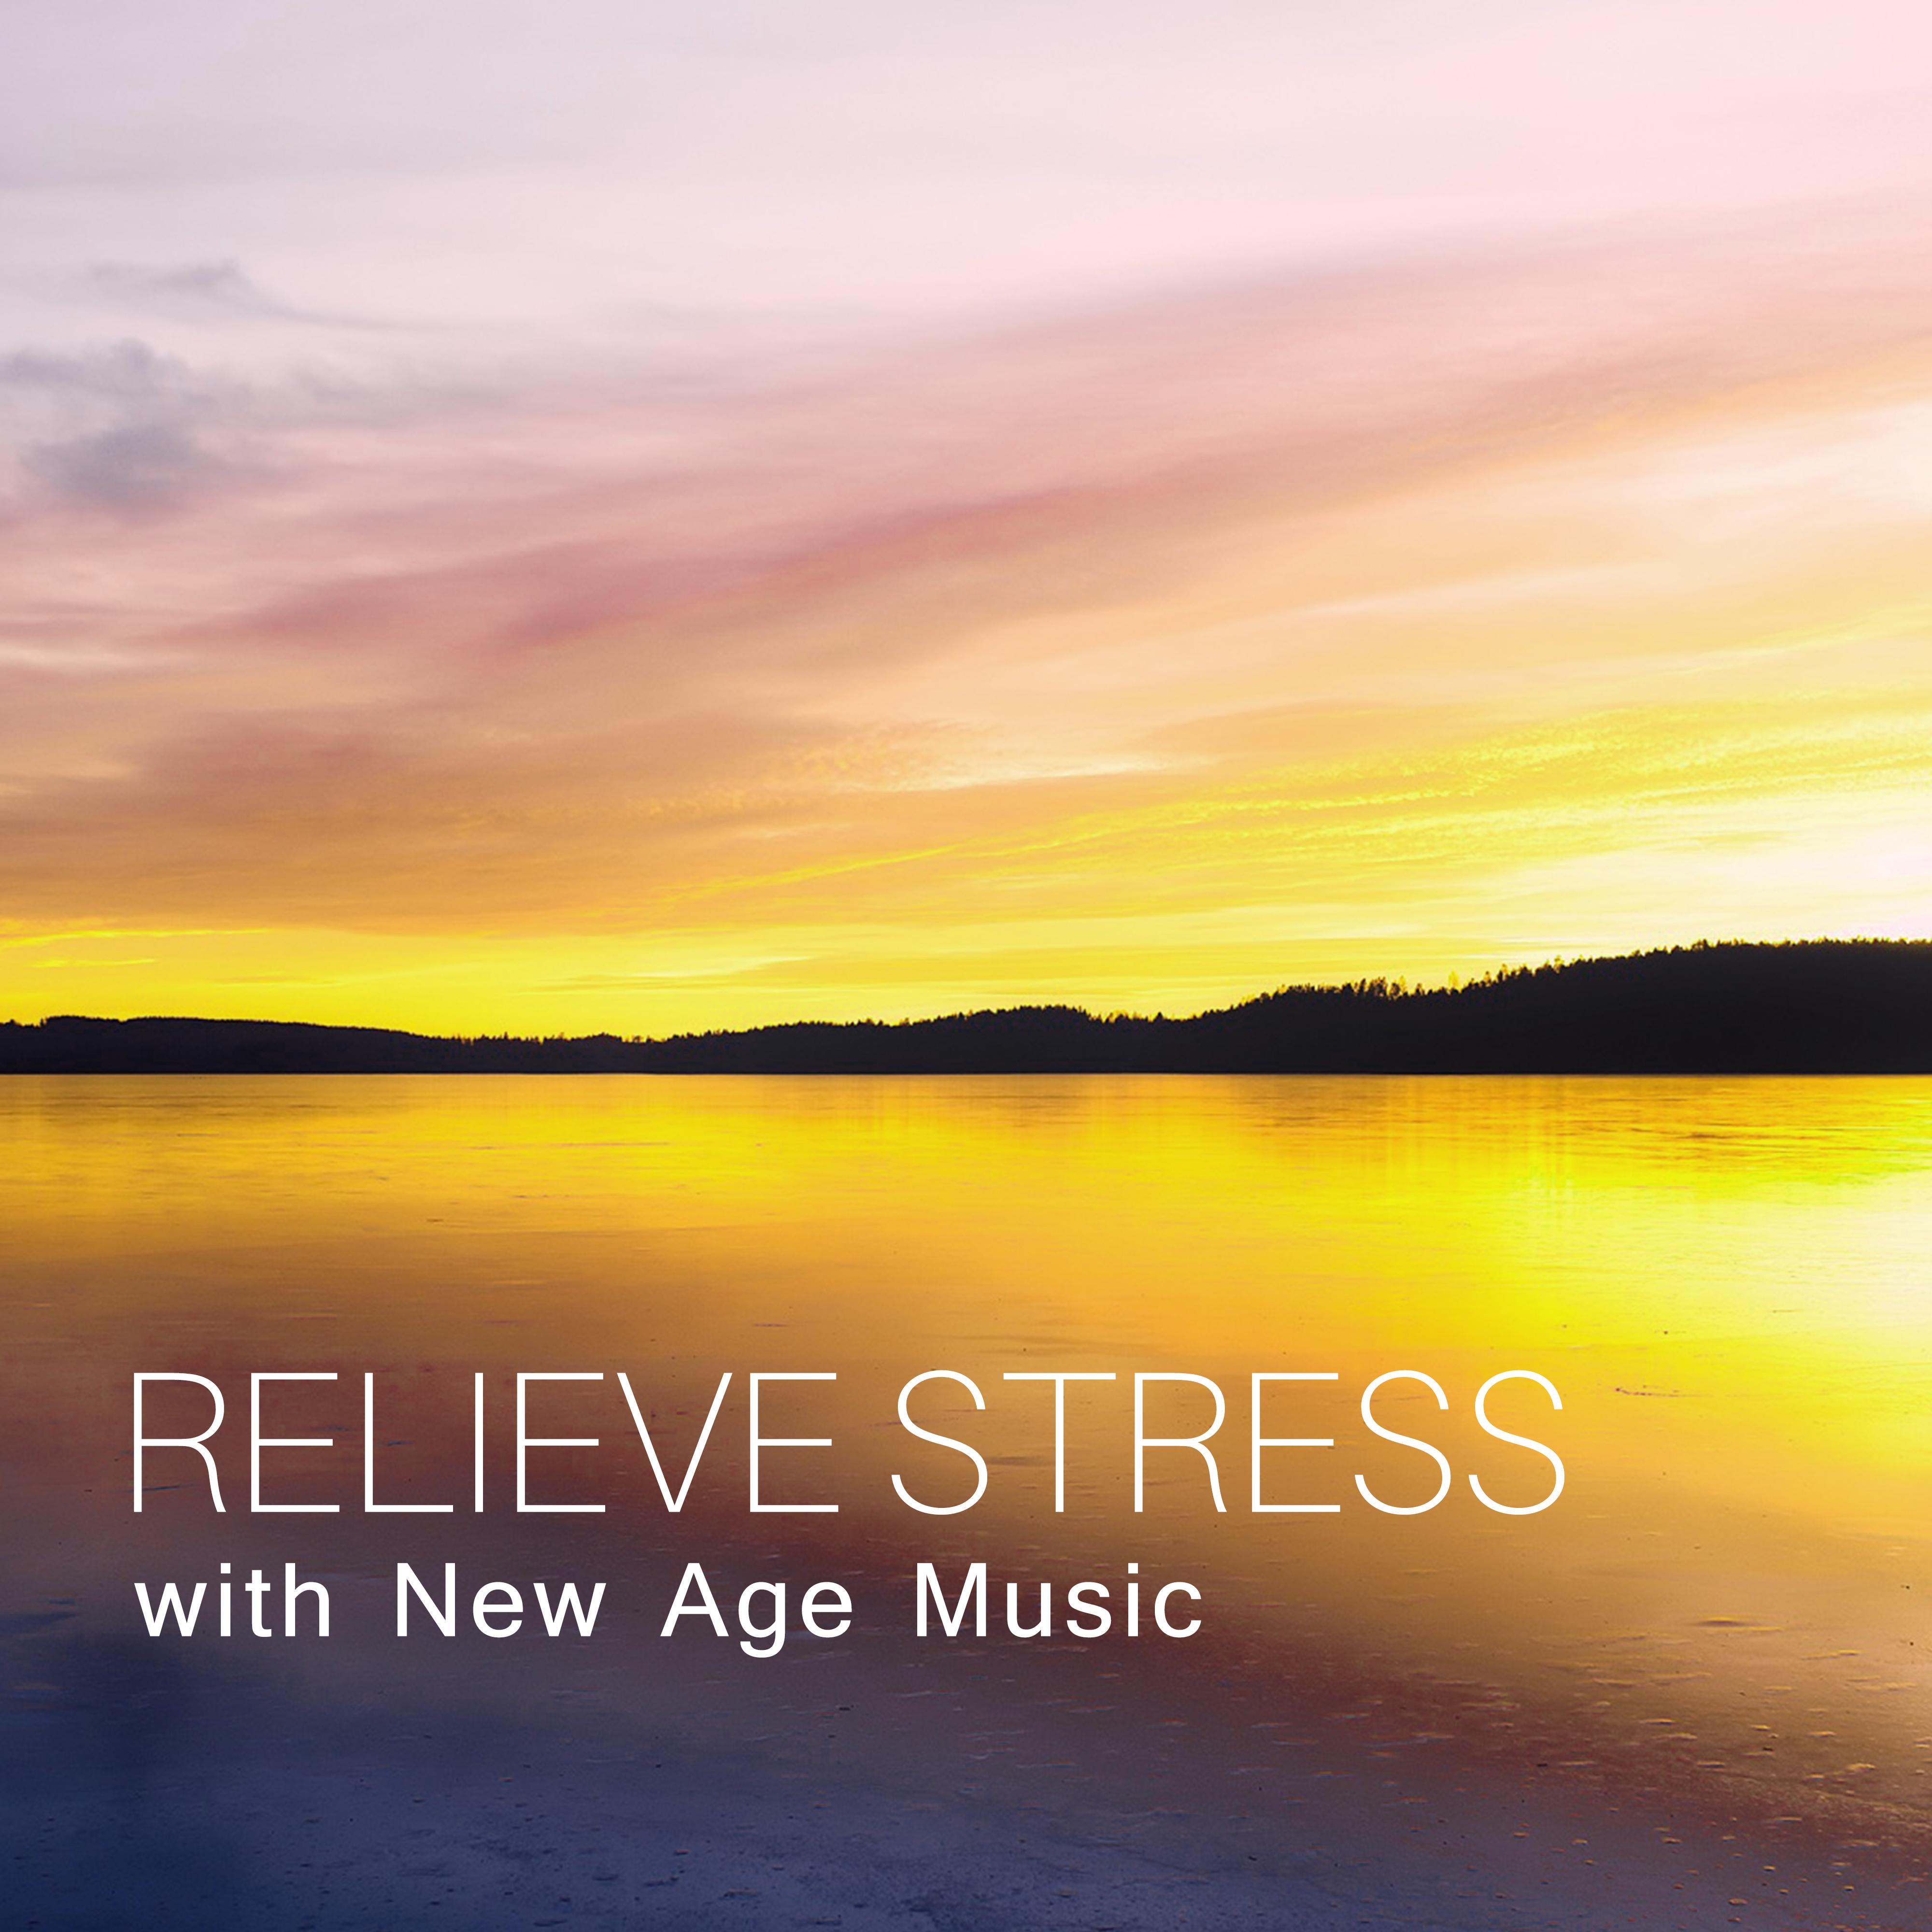 Relieve Stress with New Age Music – Calming Sounds to Relax, Stress Relief, Healing Waves, New Age Melodies